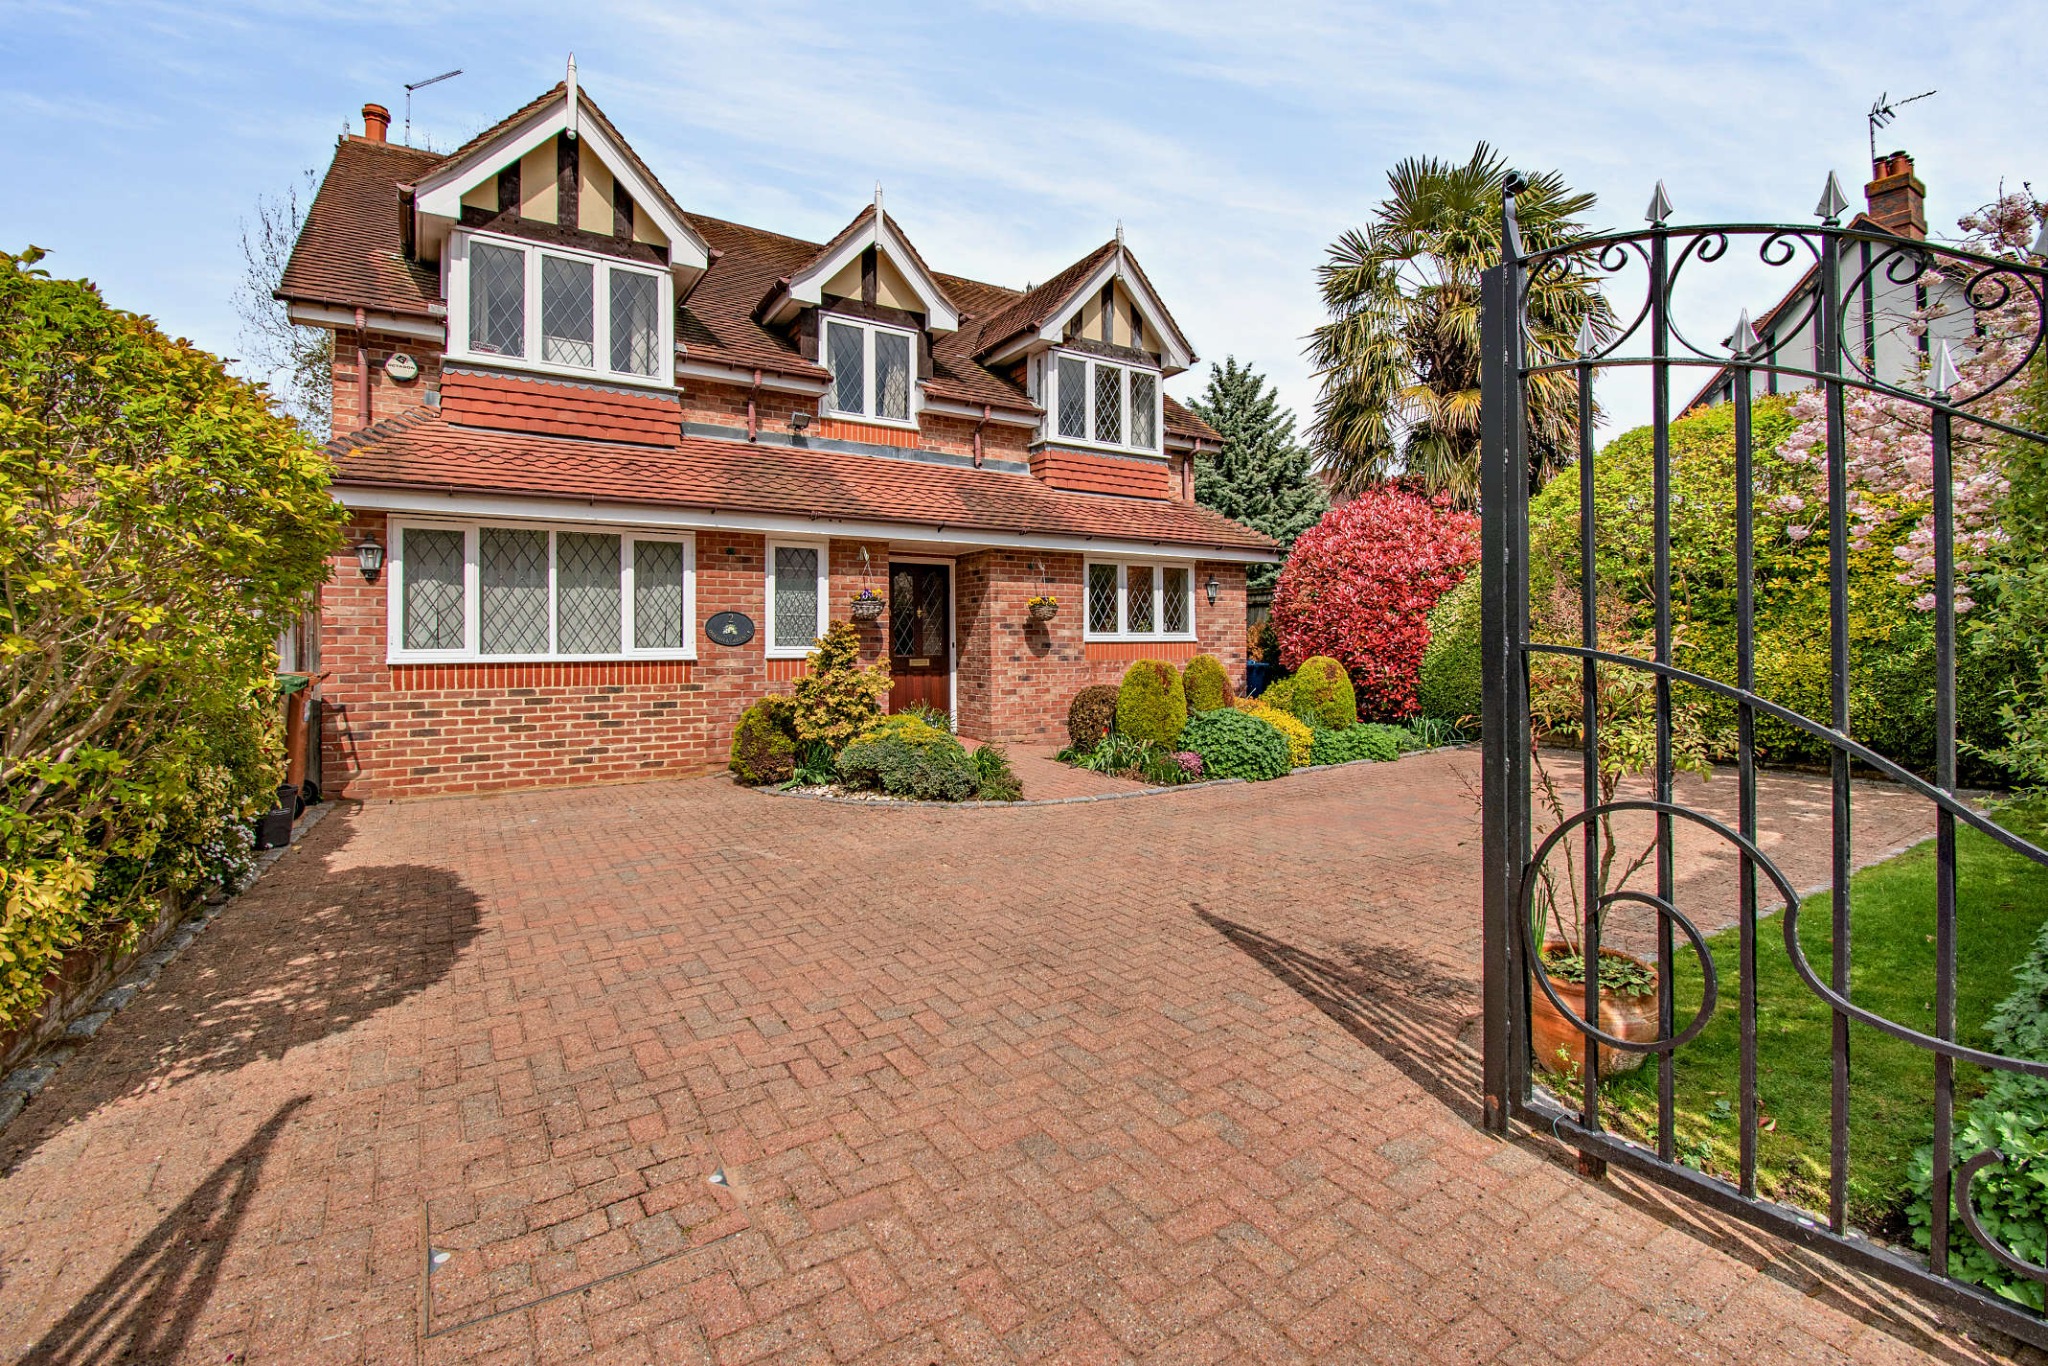 10 bedroom country house for sale in Haywards Heath